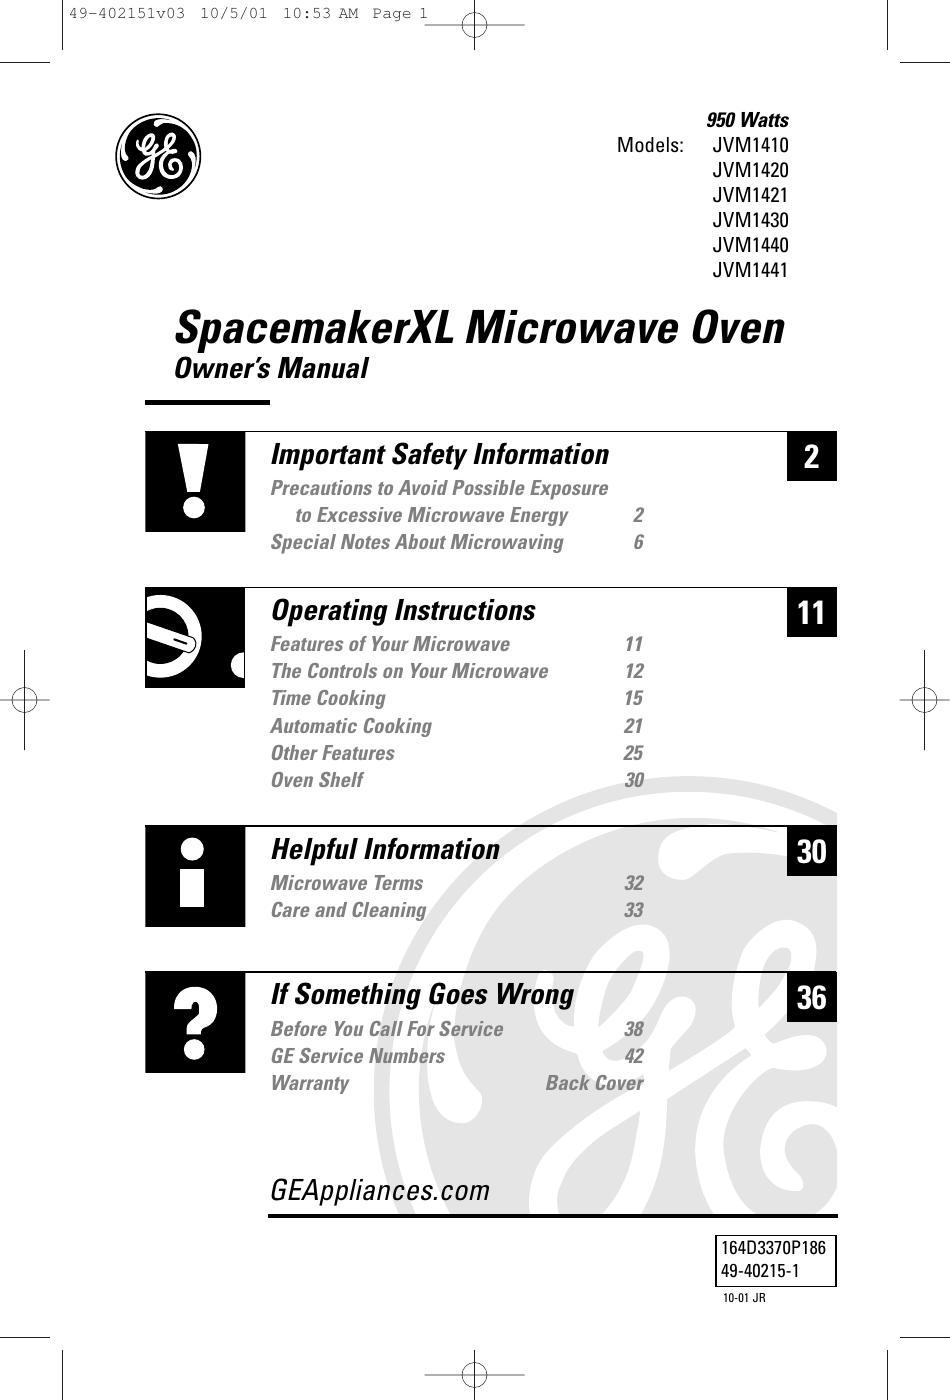 SpacemakerXL Microwave OvenOwner’s ManualModels: 950 WattsJVM1410JVM1420JVM1421JVM1430JVM1440JVM1441230Helpful InformationMicrowave Terms 32Care and Cleaning 3336If Something Goes WrongBefore You Call For Service 38GE Service Numbers 42Warranty Back CoverGEAppliances.com11Important Safety InformationPrecautions to Avoid Possible Exposure to Excessive Microwave Energy 2Special Notes About Microwaving 6Operating InstructionsFeatures of Your Microwave 11The Controls on Your Microwave 12Time Cooking 15Automatic Cooking 21Other Features 25Oven Shelf 30164D3370P18649-40215-110-01 JR49-402151v03  10/5/01  10:53 AM  Page 1